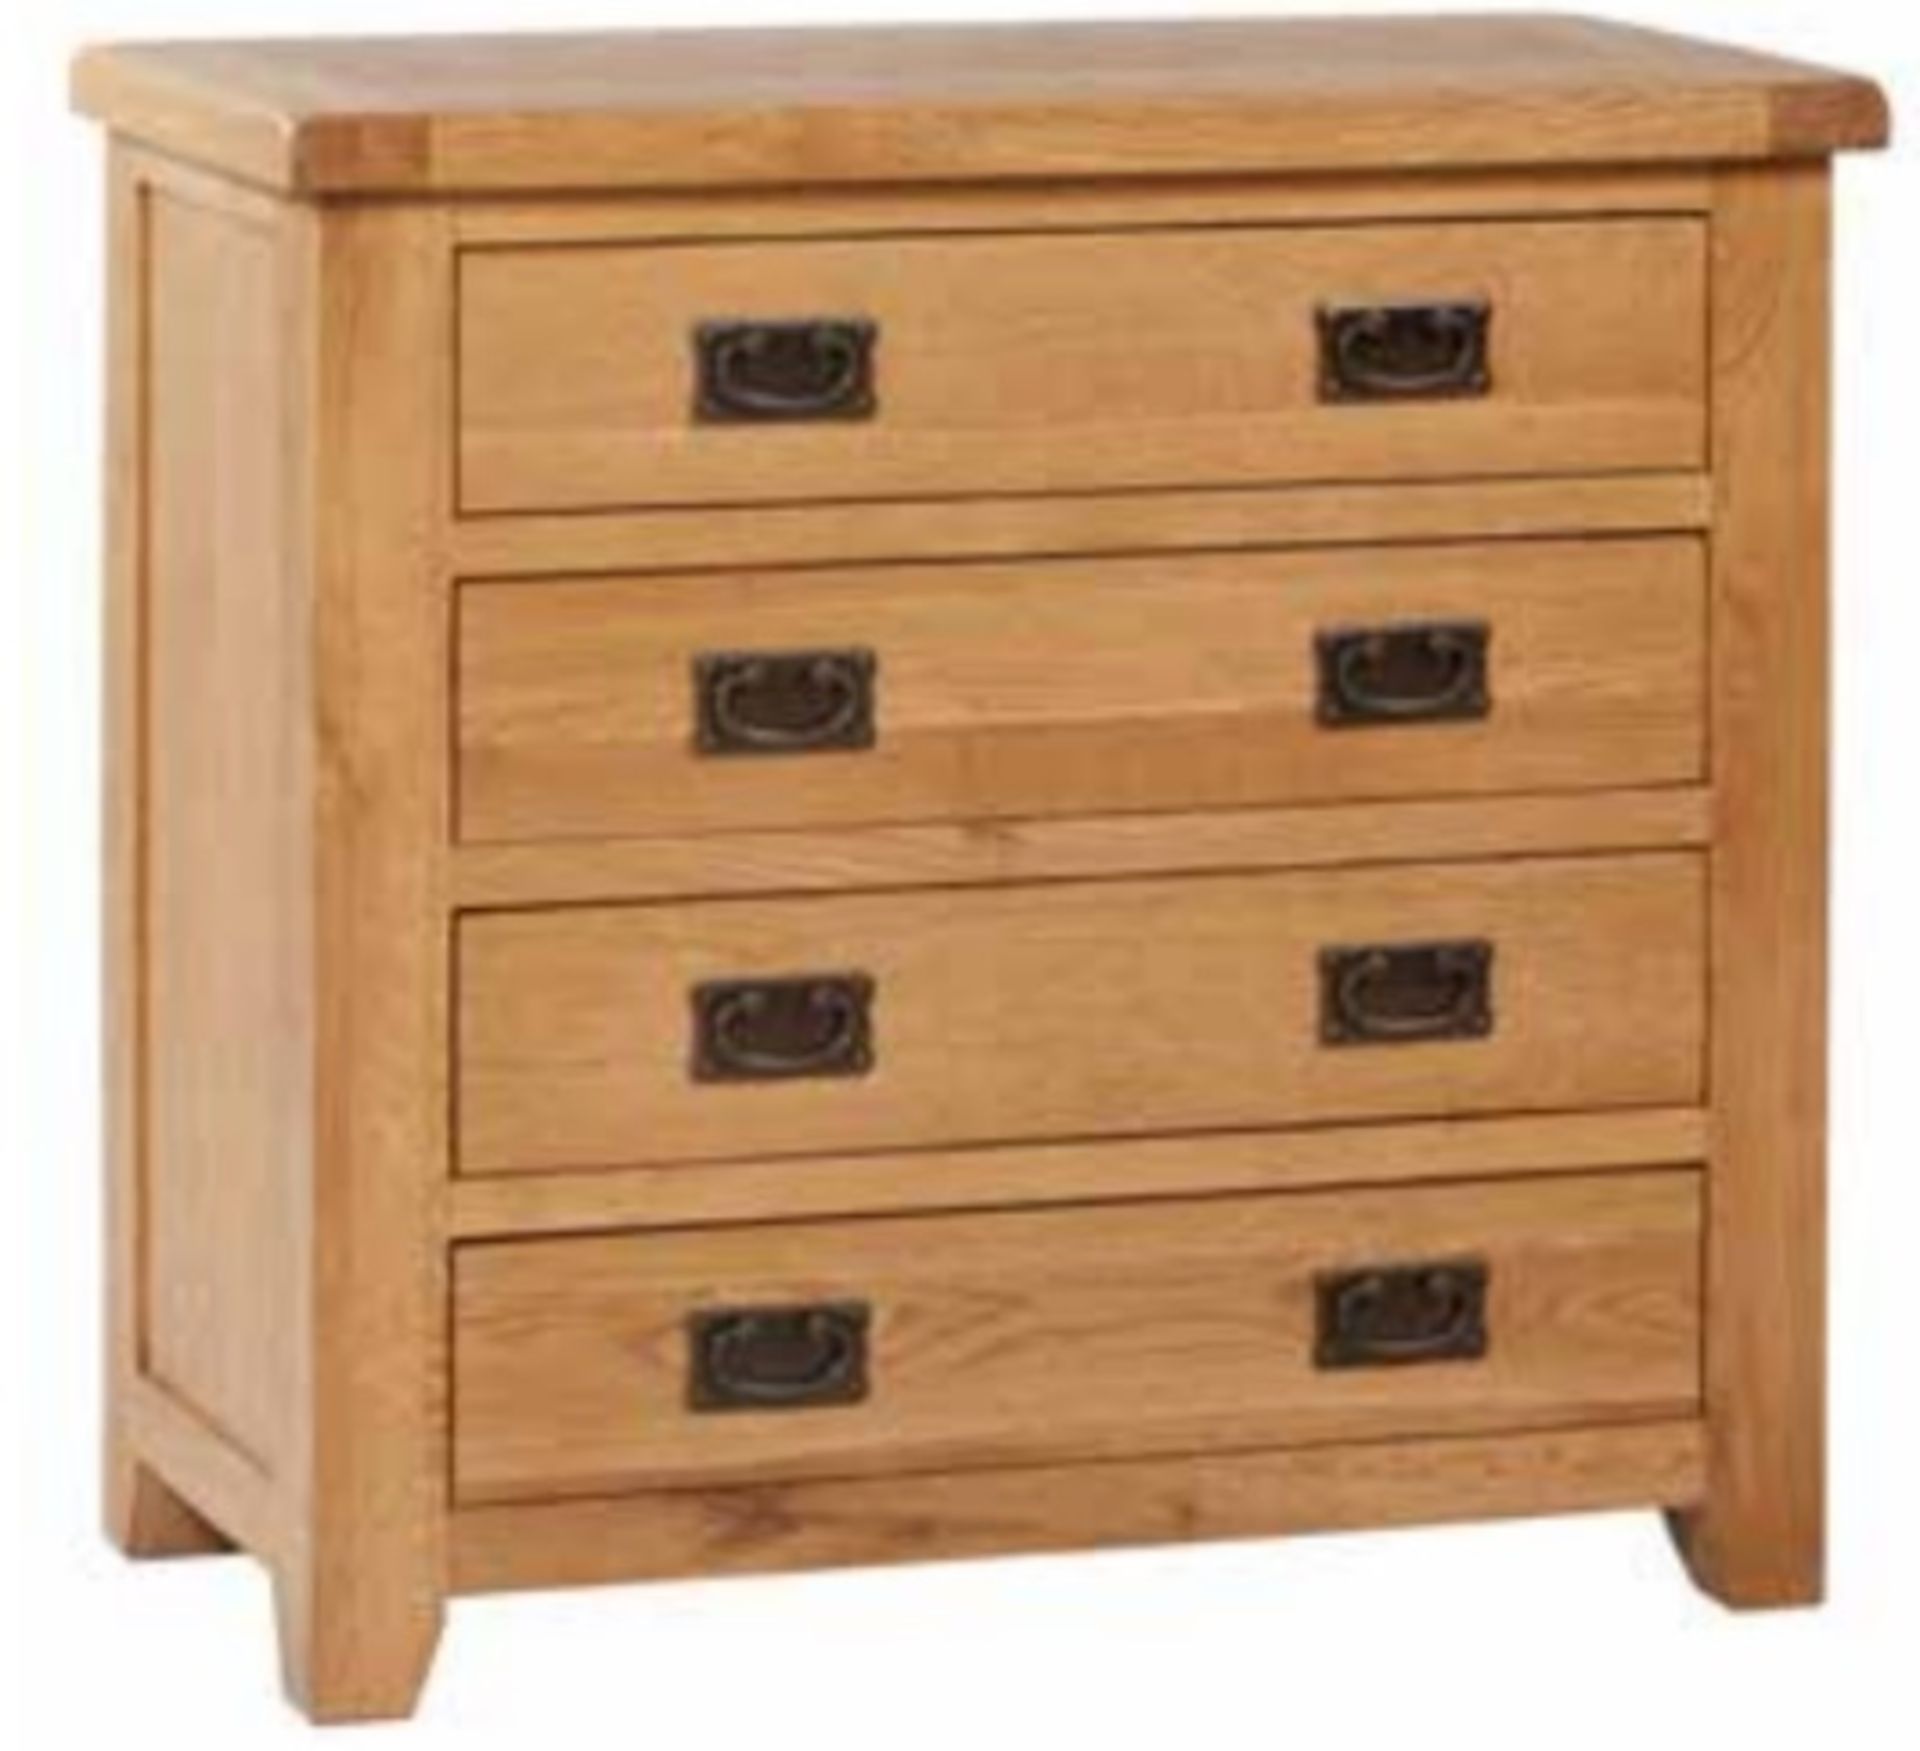 V Brand New Chiswick Oak 4 drawer chest 85w x 42d x 81h cms ISP £259.00 (thehomemill)